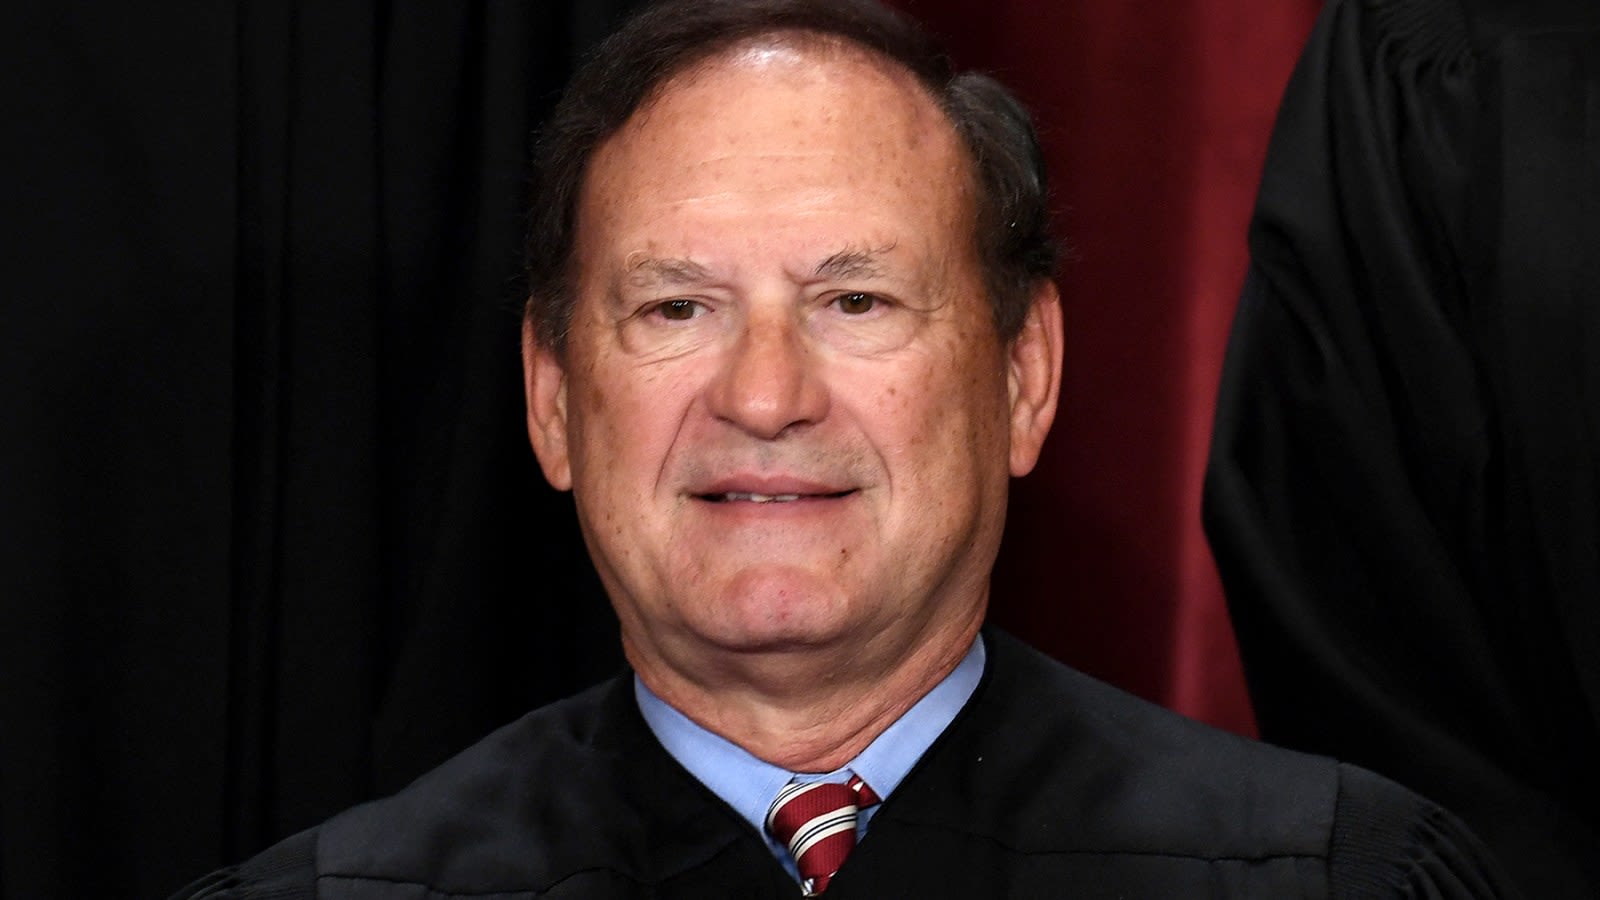 Alito Refuses to Recuse: 'My Wife Is Fond of Flying Flags'